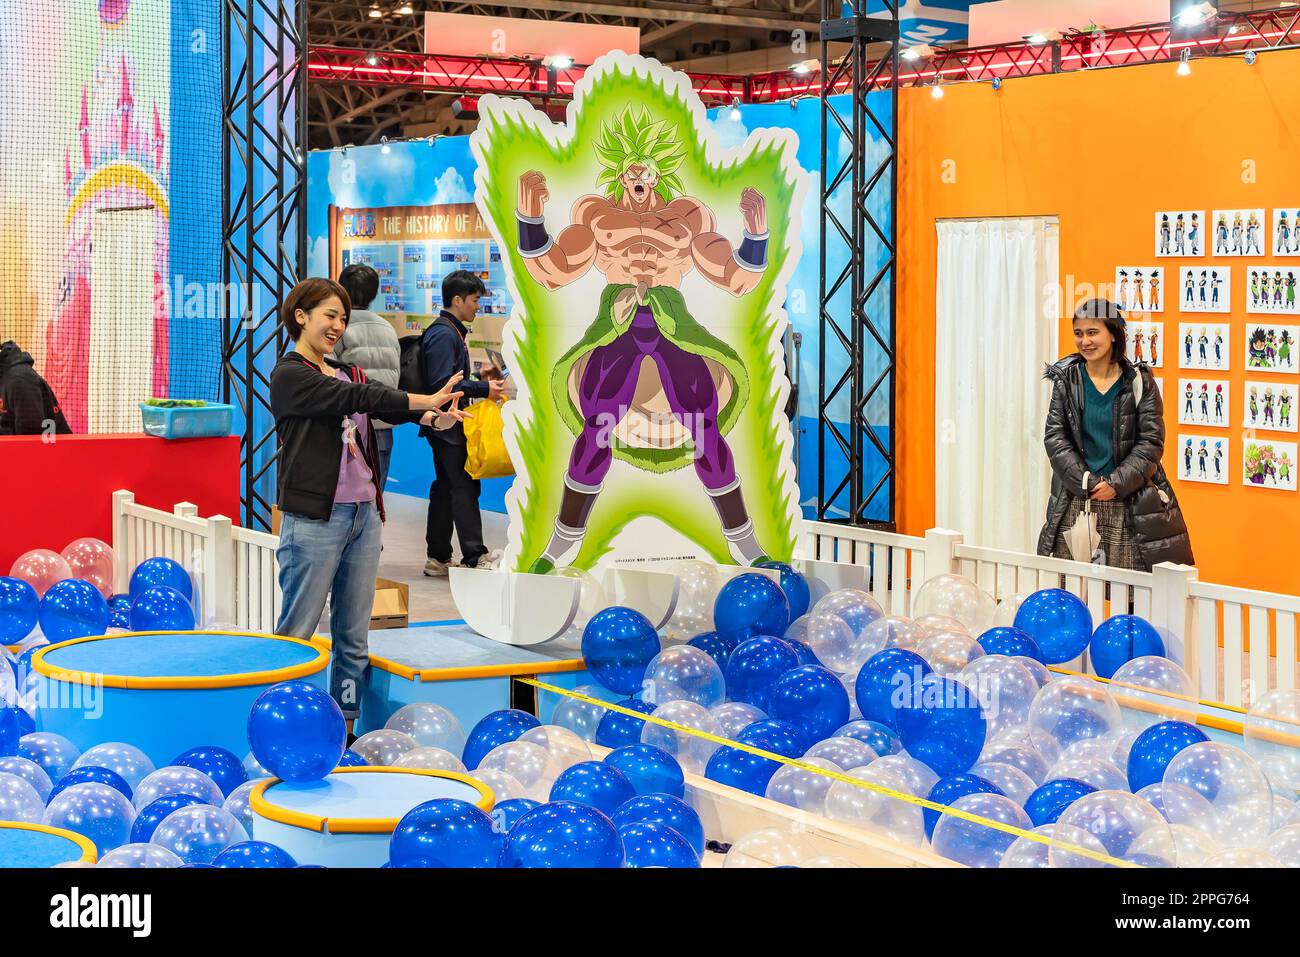 chiba, japan - december 22 2018: Woman staff of the anime convention Jump Festa 19 entertaining the area dedicating to Dragon Ball decorated with a life sized standee of the character named Broly. Stock Photo